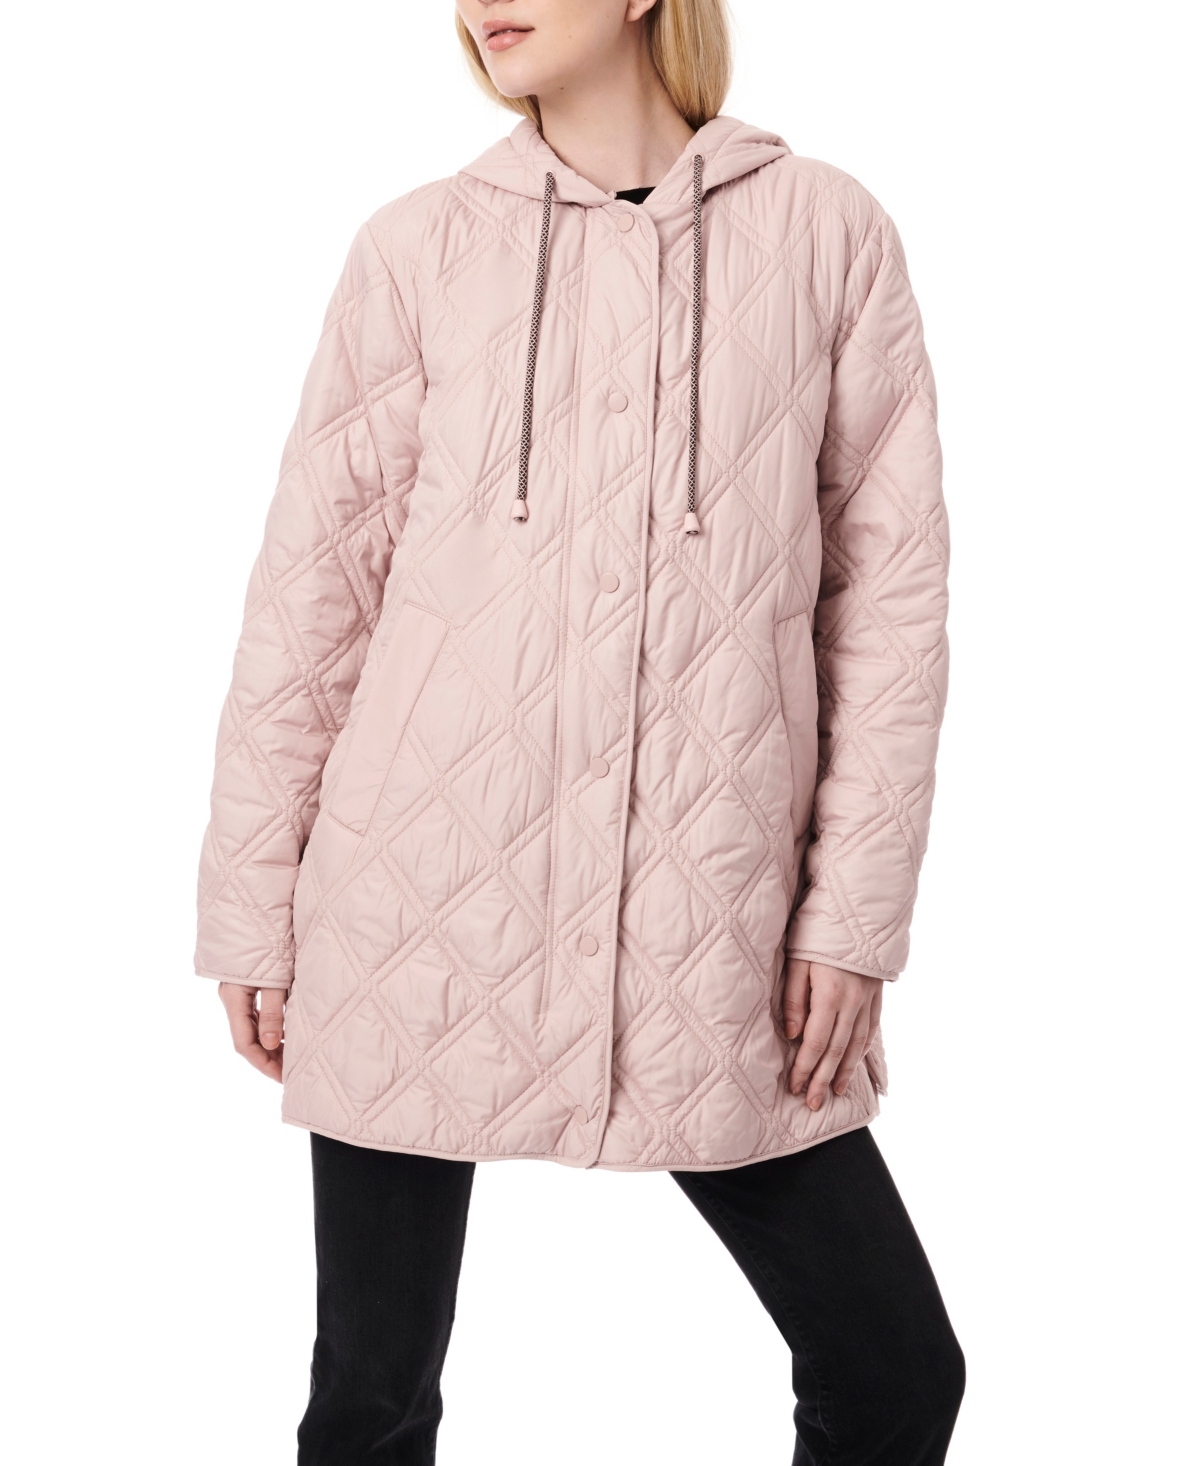 Women's Light Weight Quilted Jacket - Night shadow